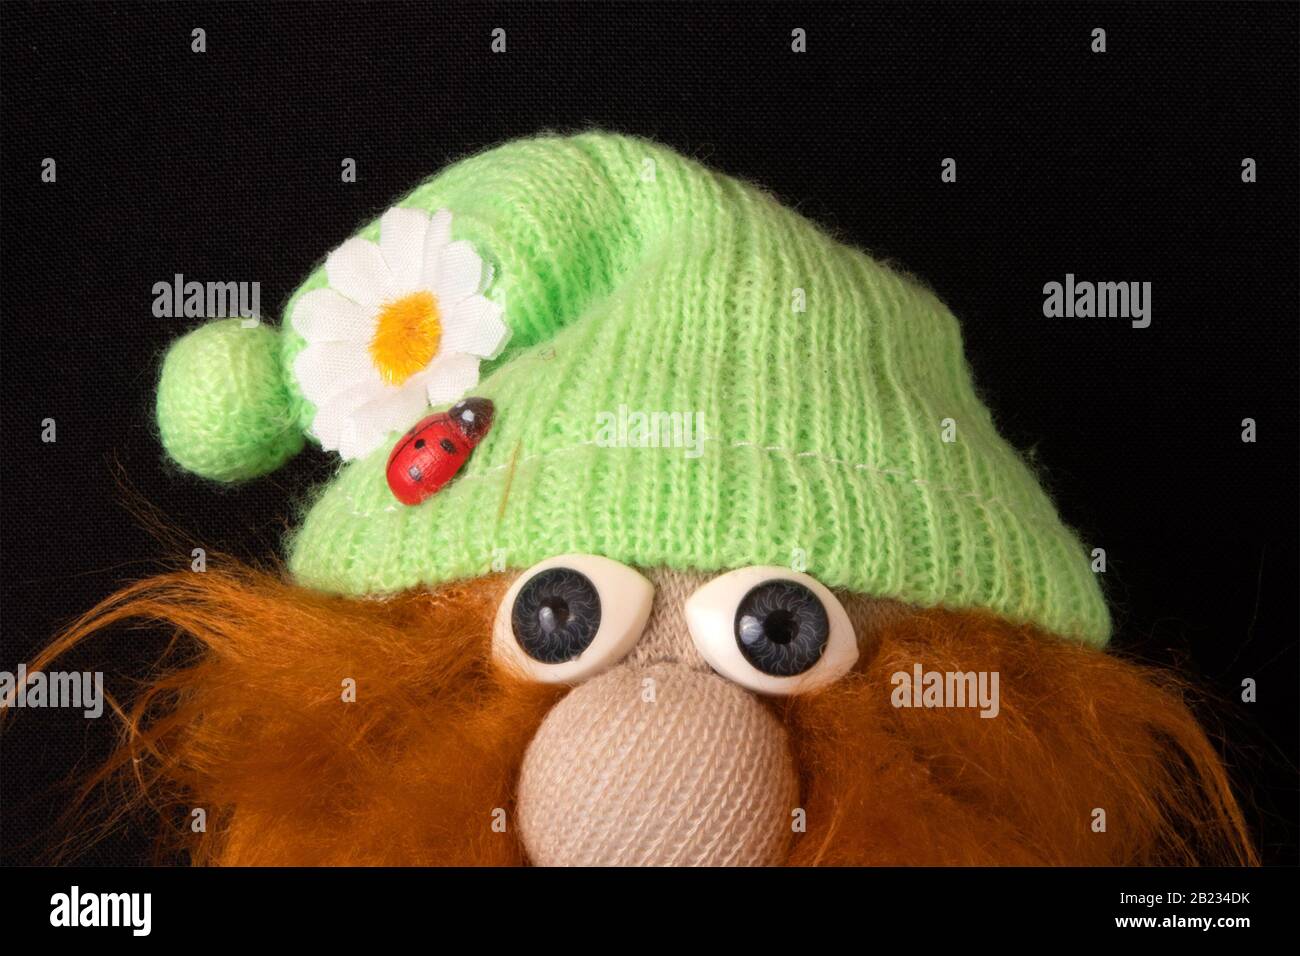 Expressive eyes of funny fairytale gnome with red shaggy beard, designer soft toy Stock Photo